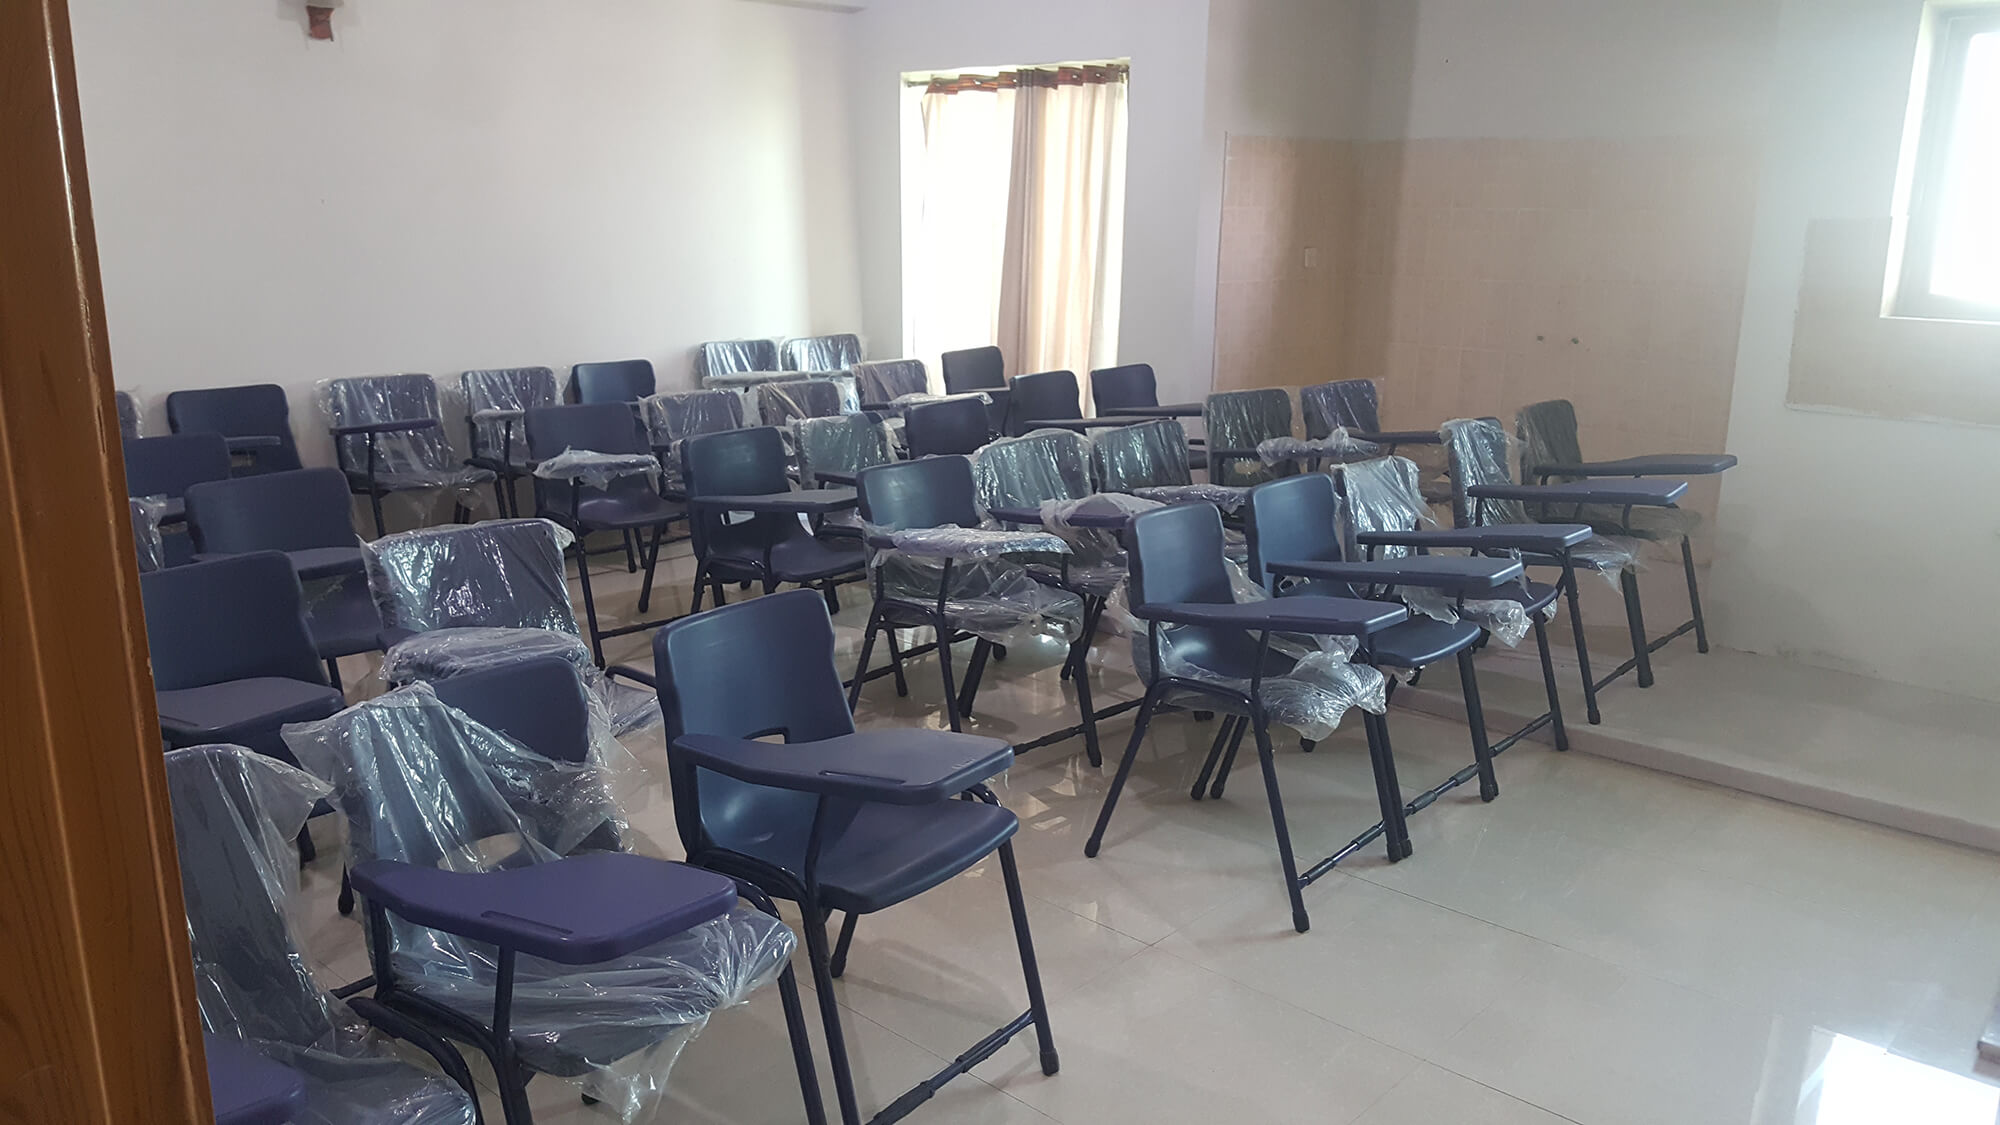 Lecture Halls 19